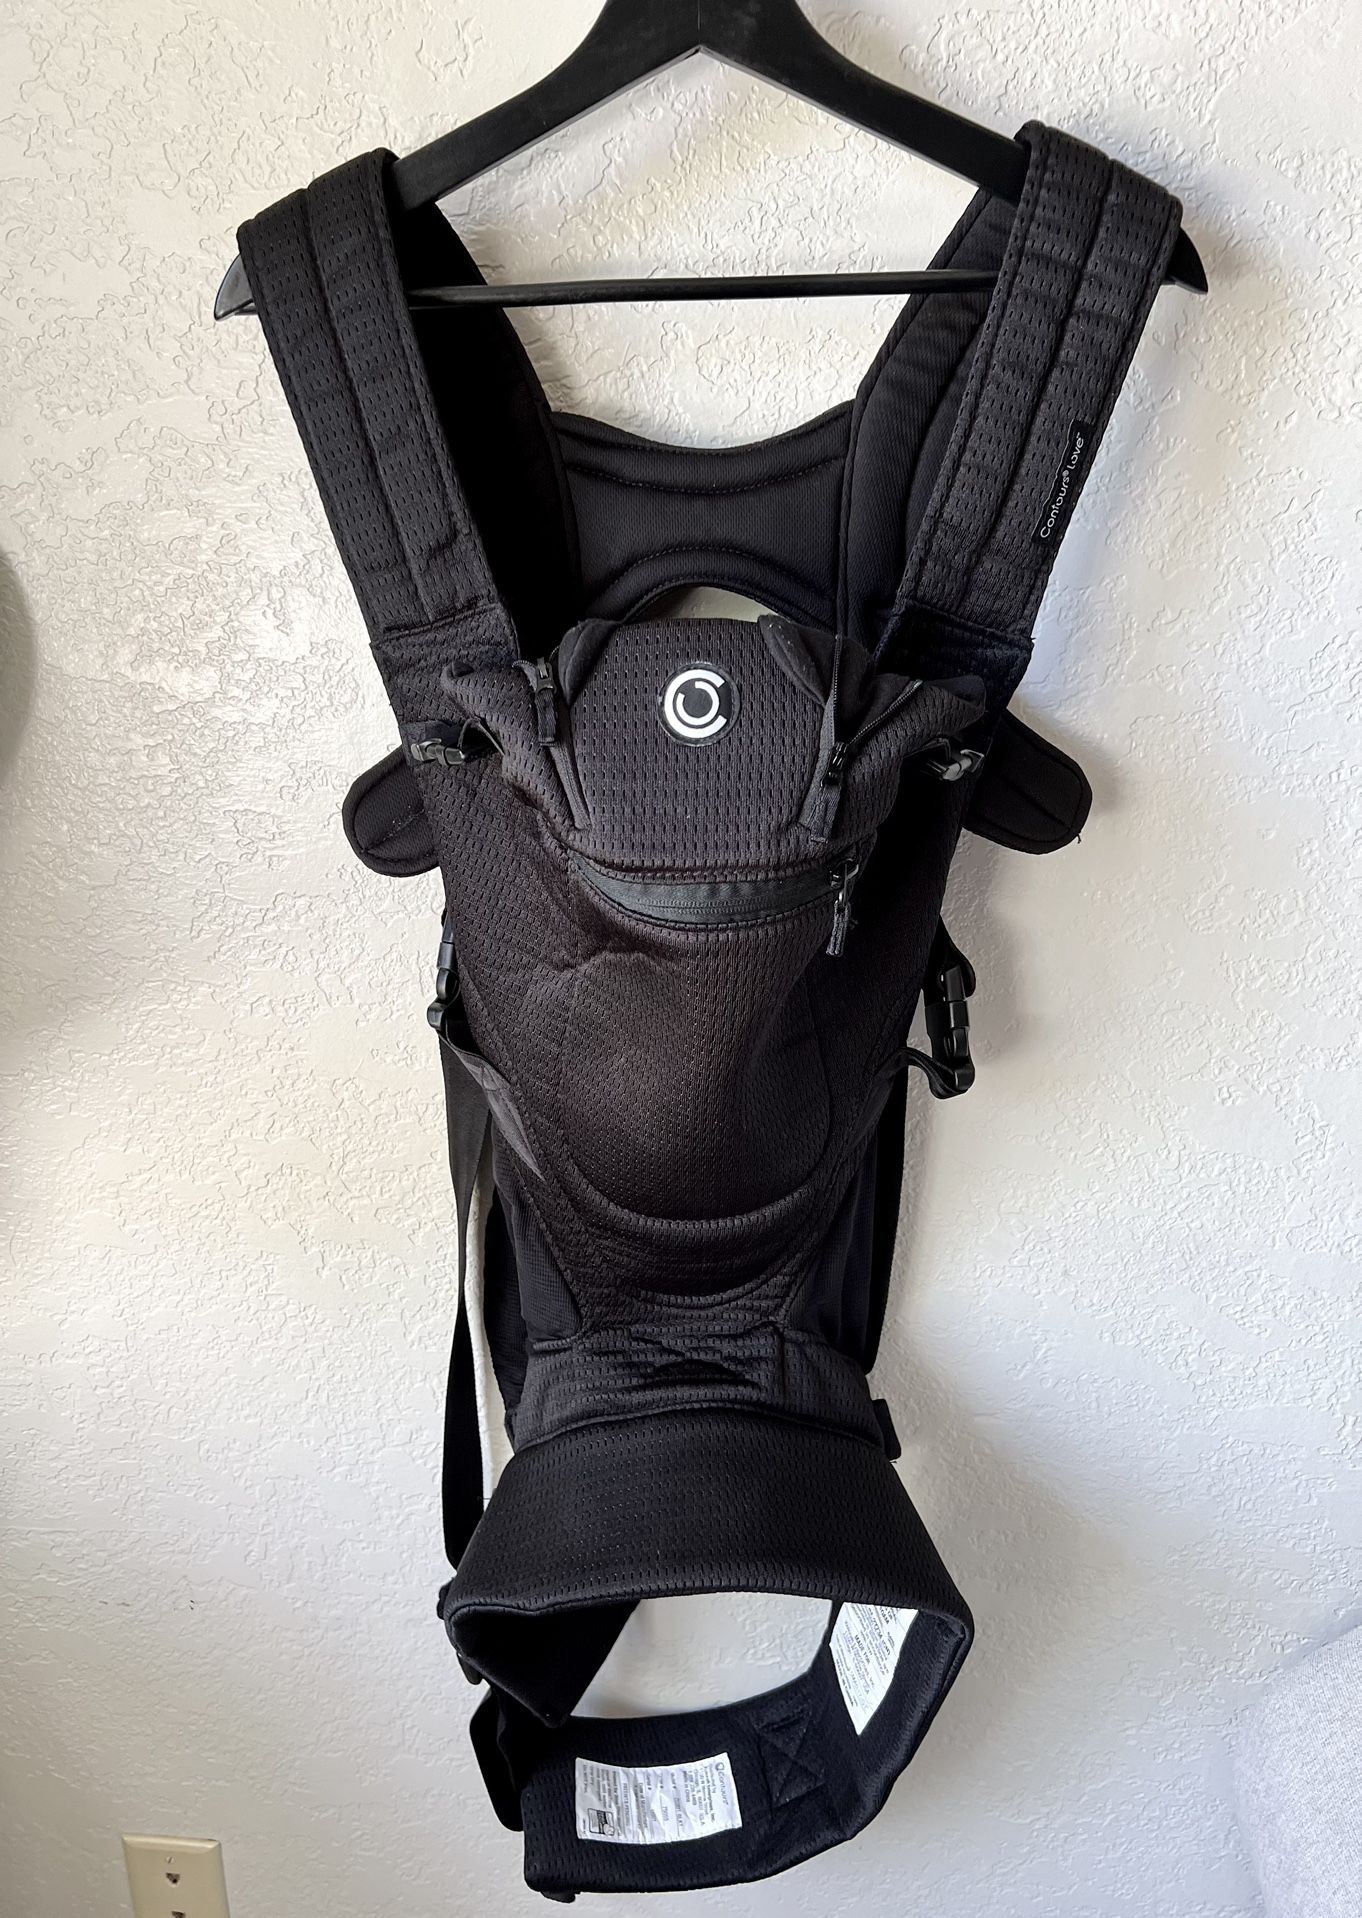 Contours Love 3-Position Baby Carrier